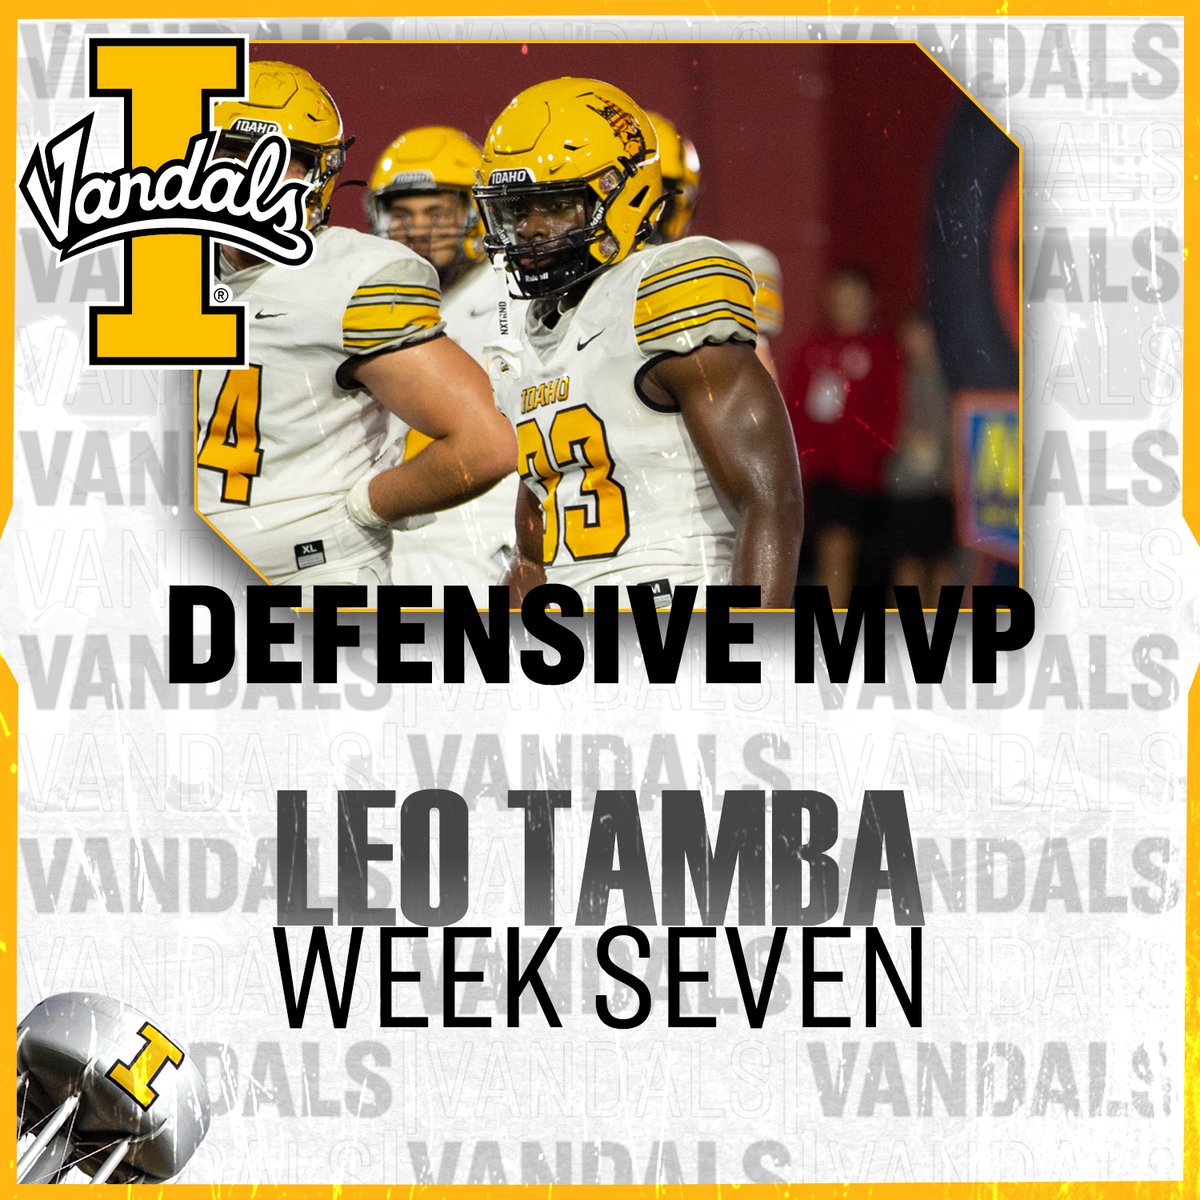 .@LeoTb28 Spent a ton of time in the Portland State backfield and earned game seven Defensive MVP honors! #GoVandals